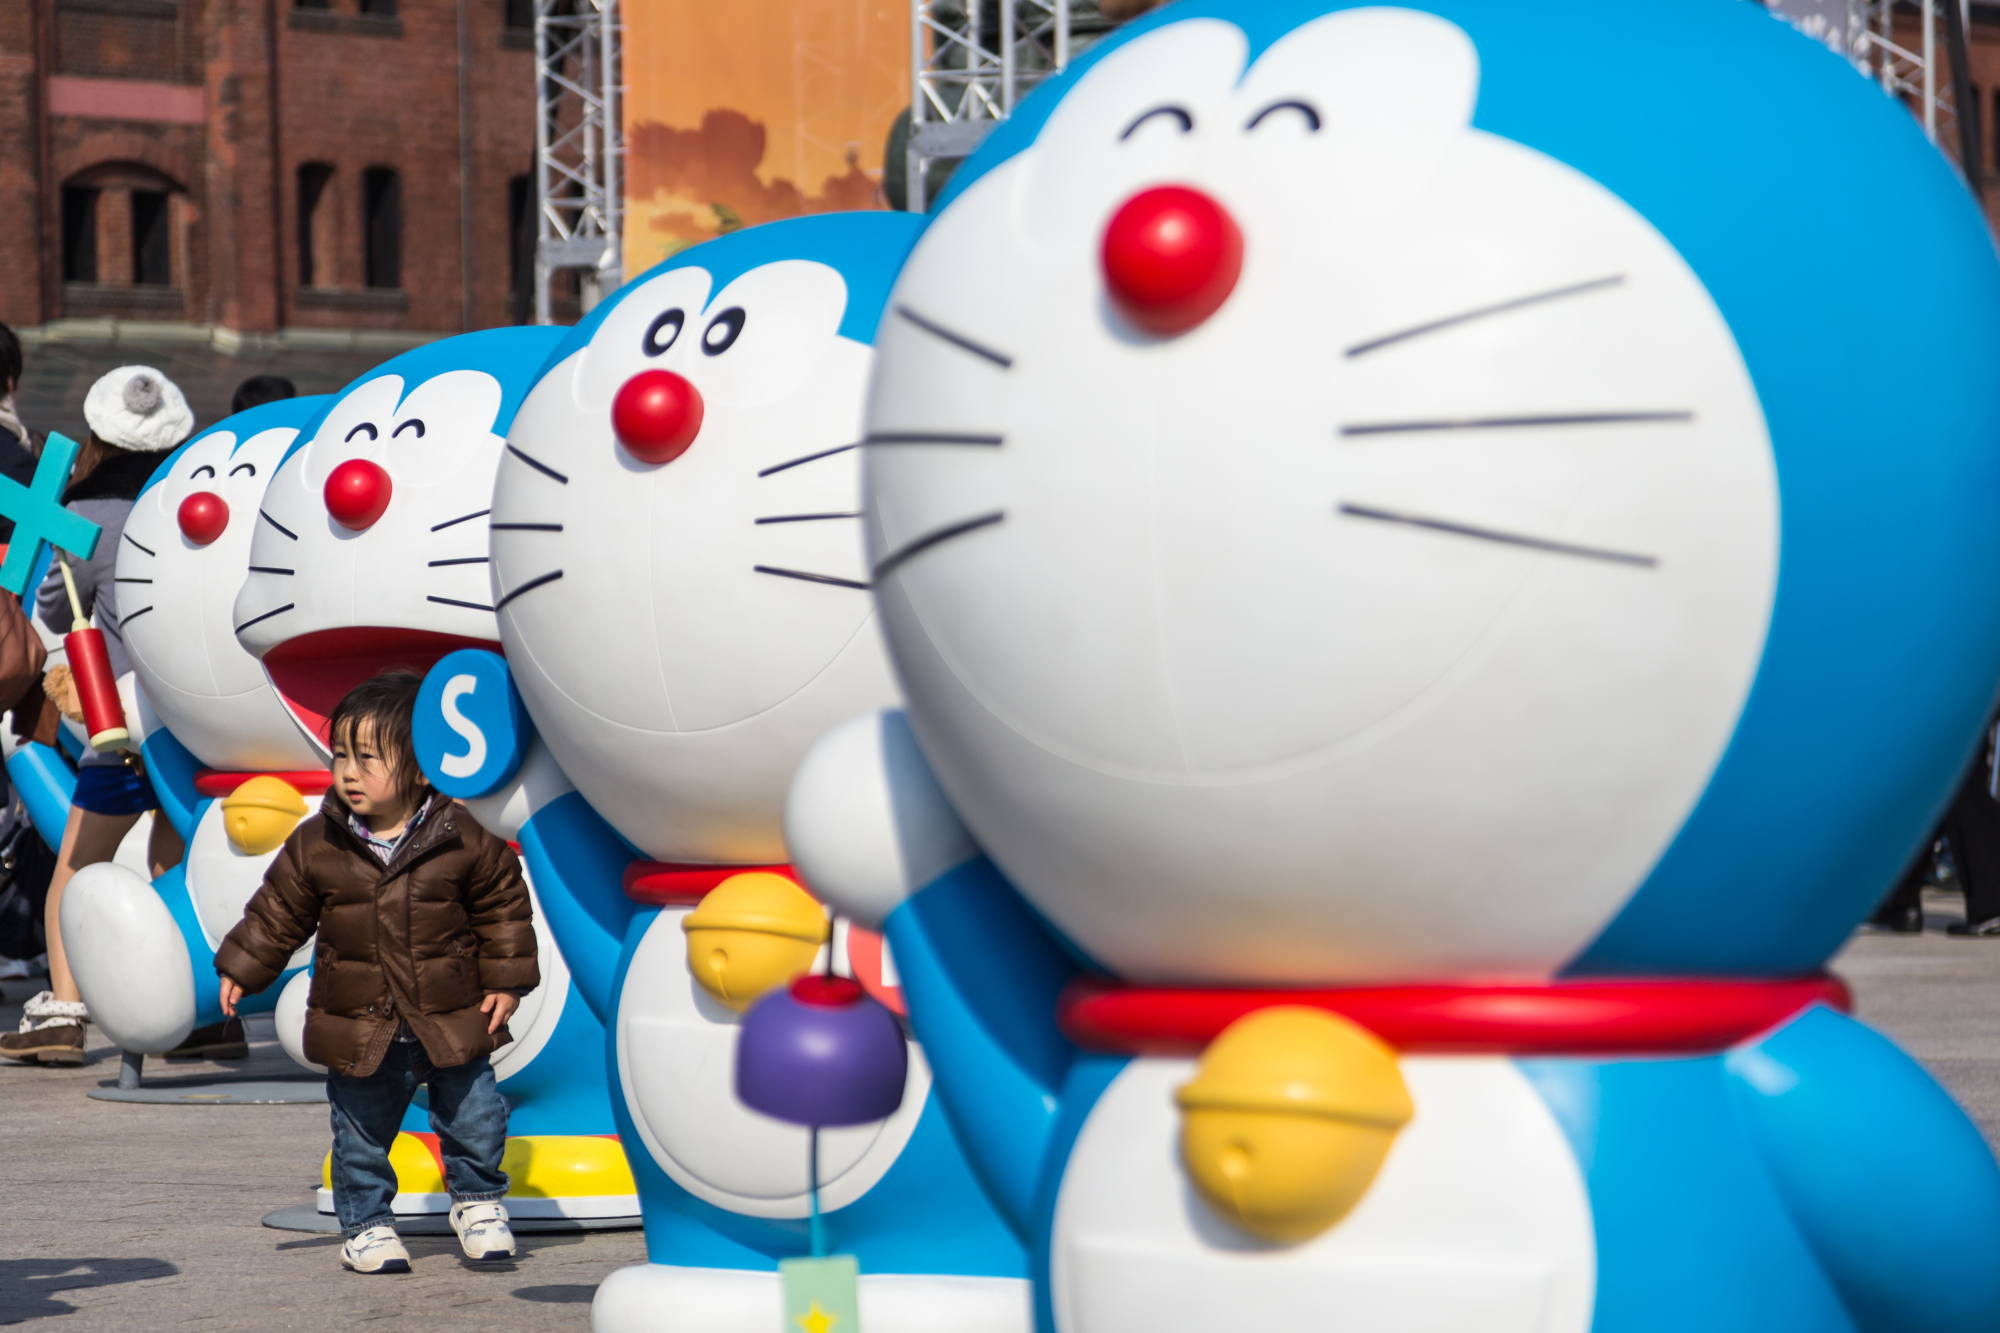 Back to the future: The world celebrates the 50th anniversary of Doraemon |  The Japan Times